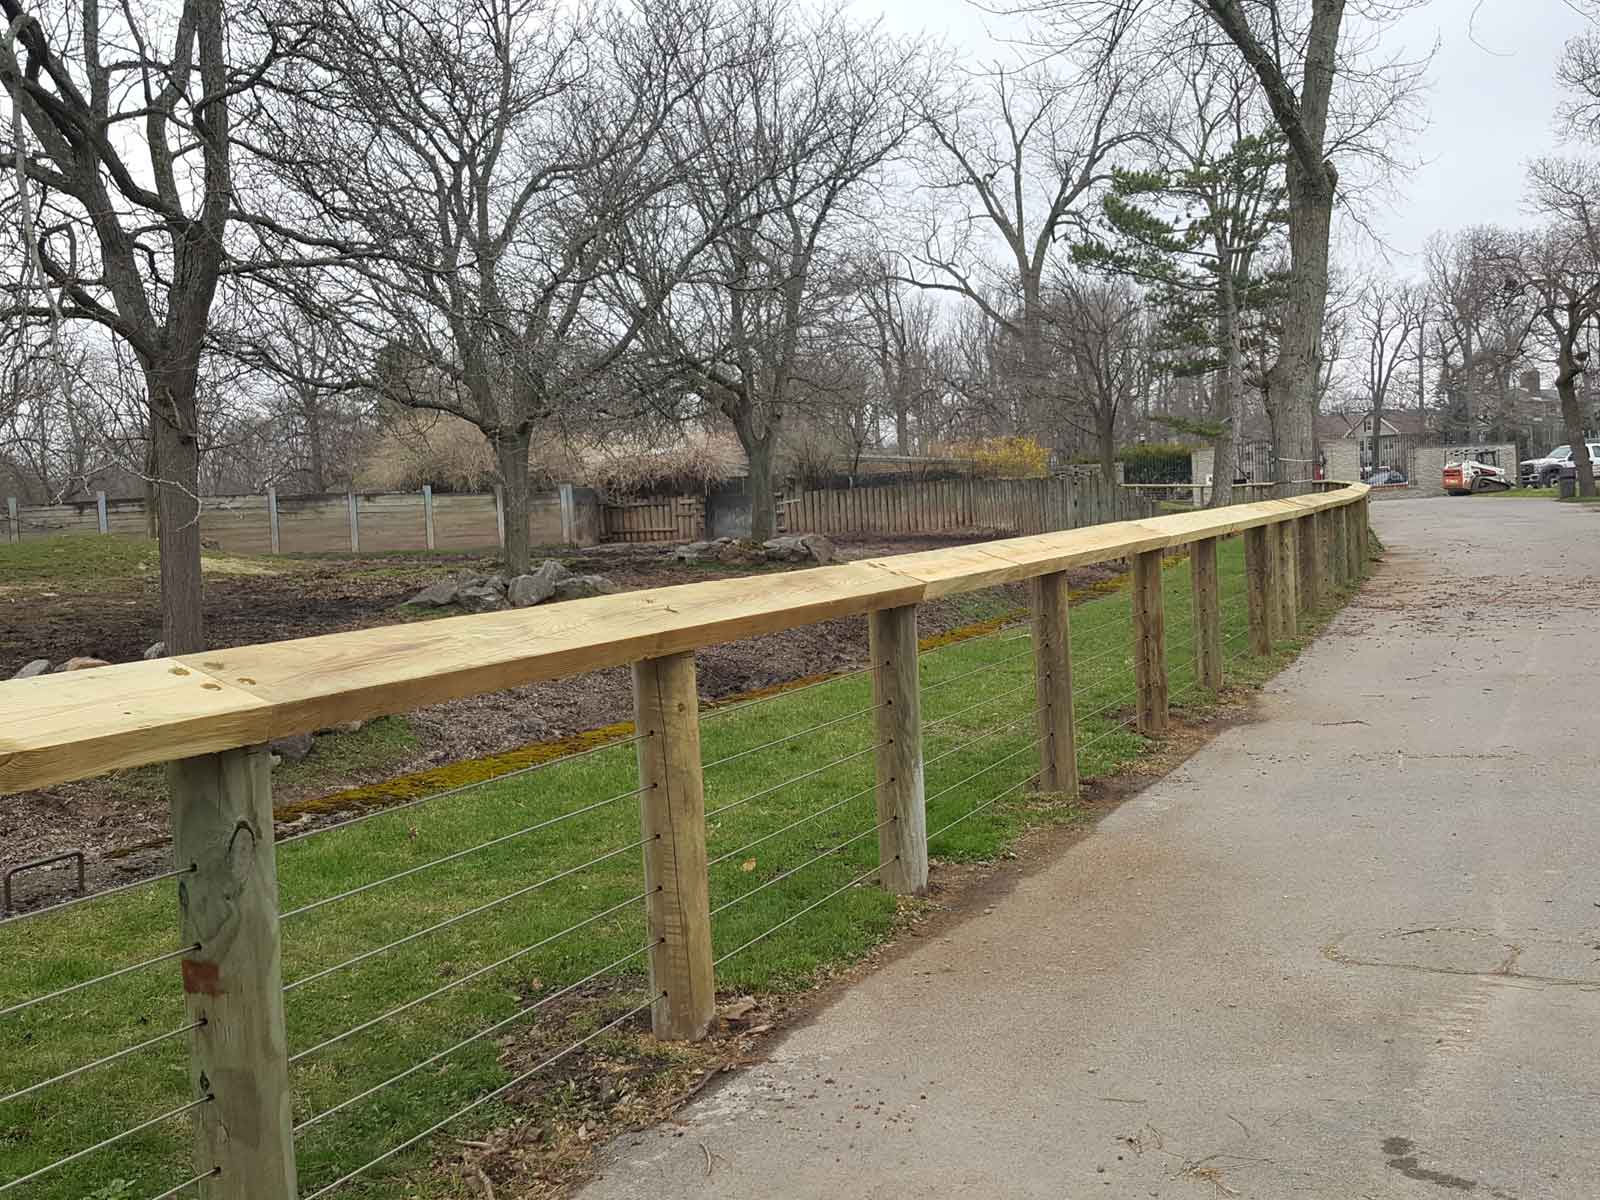 Commercial Fencing for Nature Reserves and Zoos in Lockport, NY